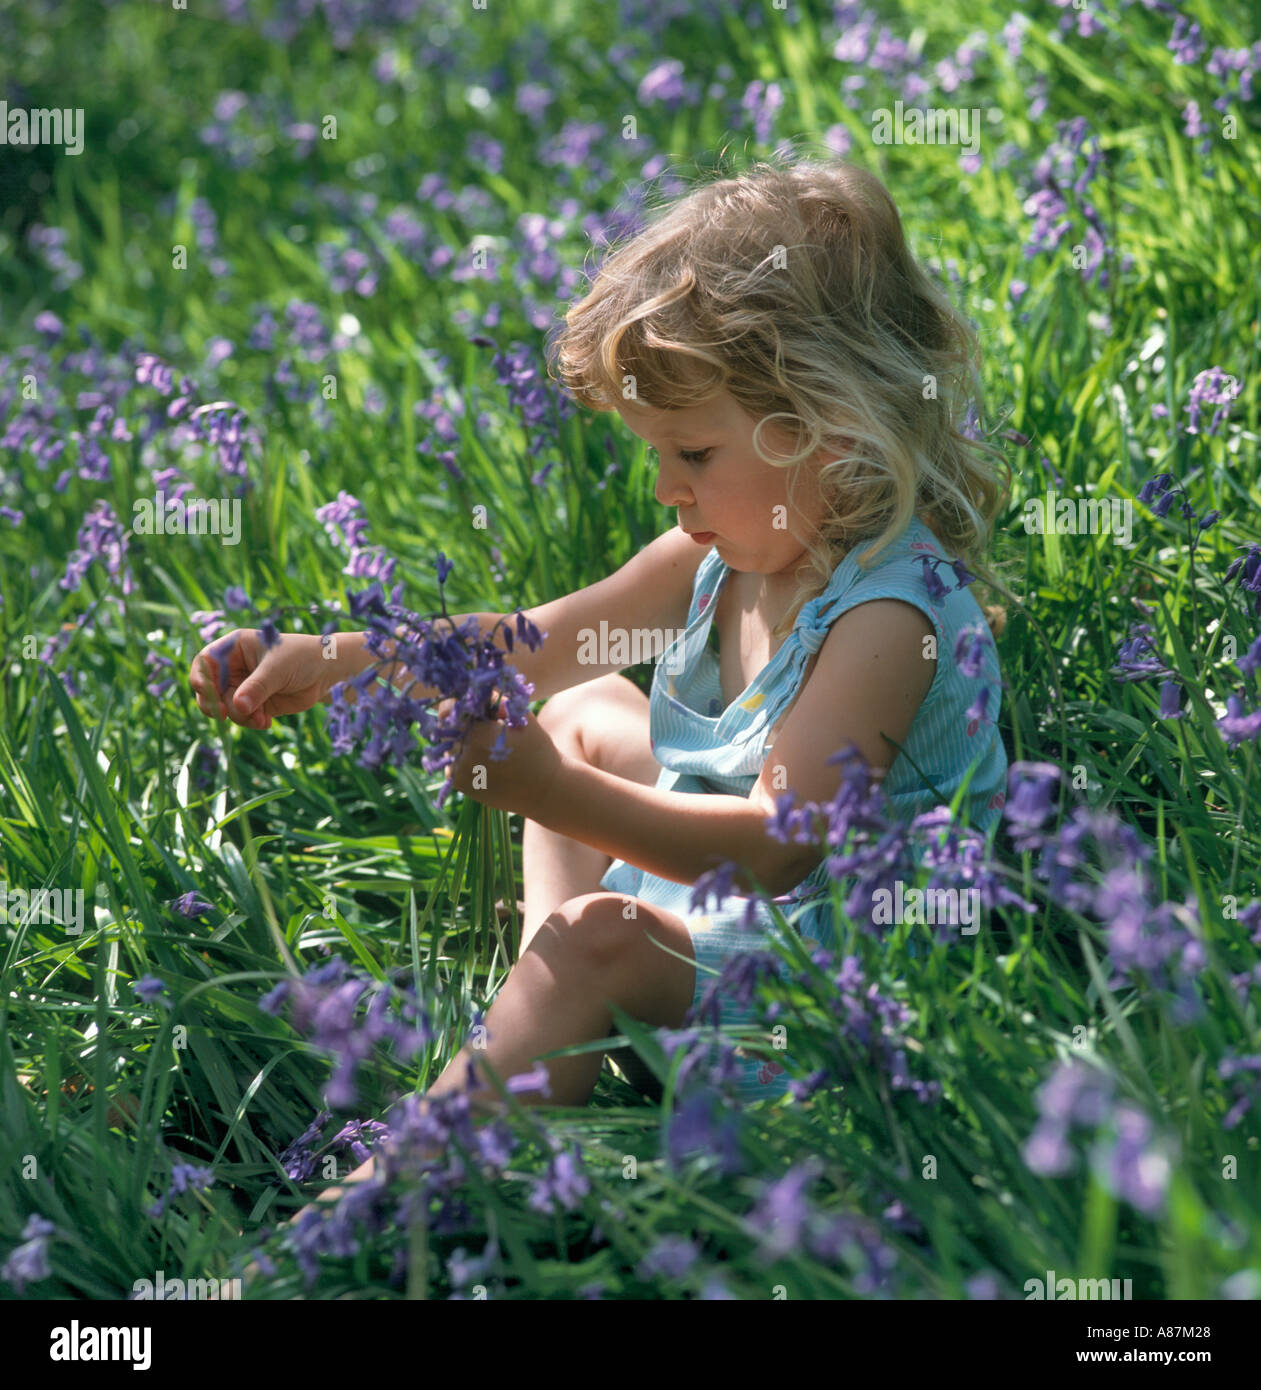 Little Girl sitting in Field of Bluebells, West Yorkshire, England, United Kingdom Stock Photo